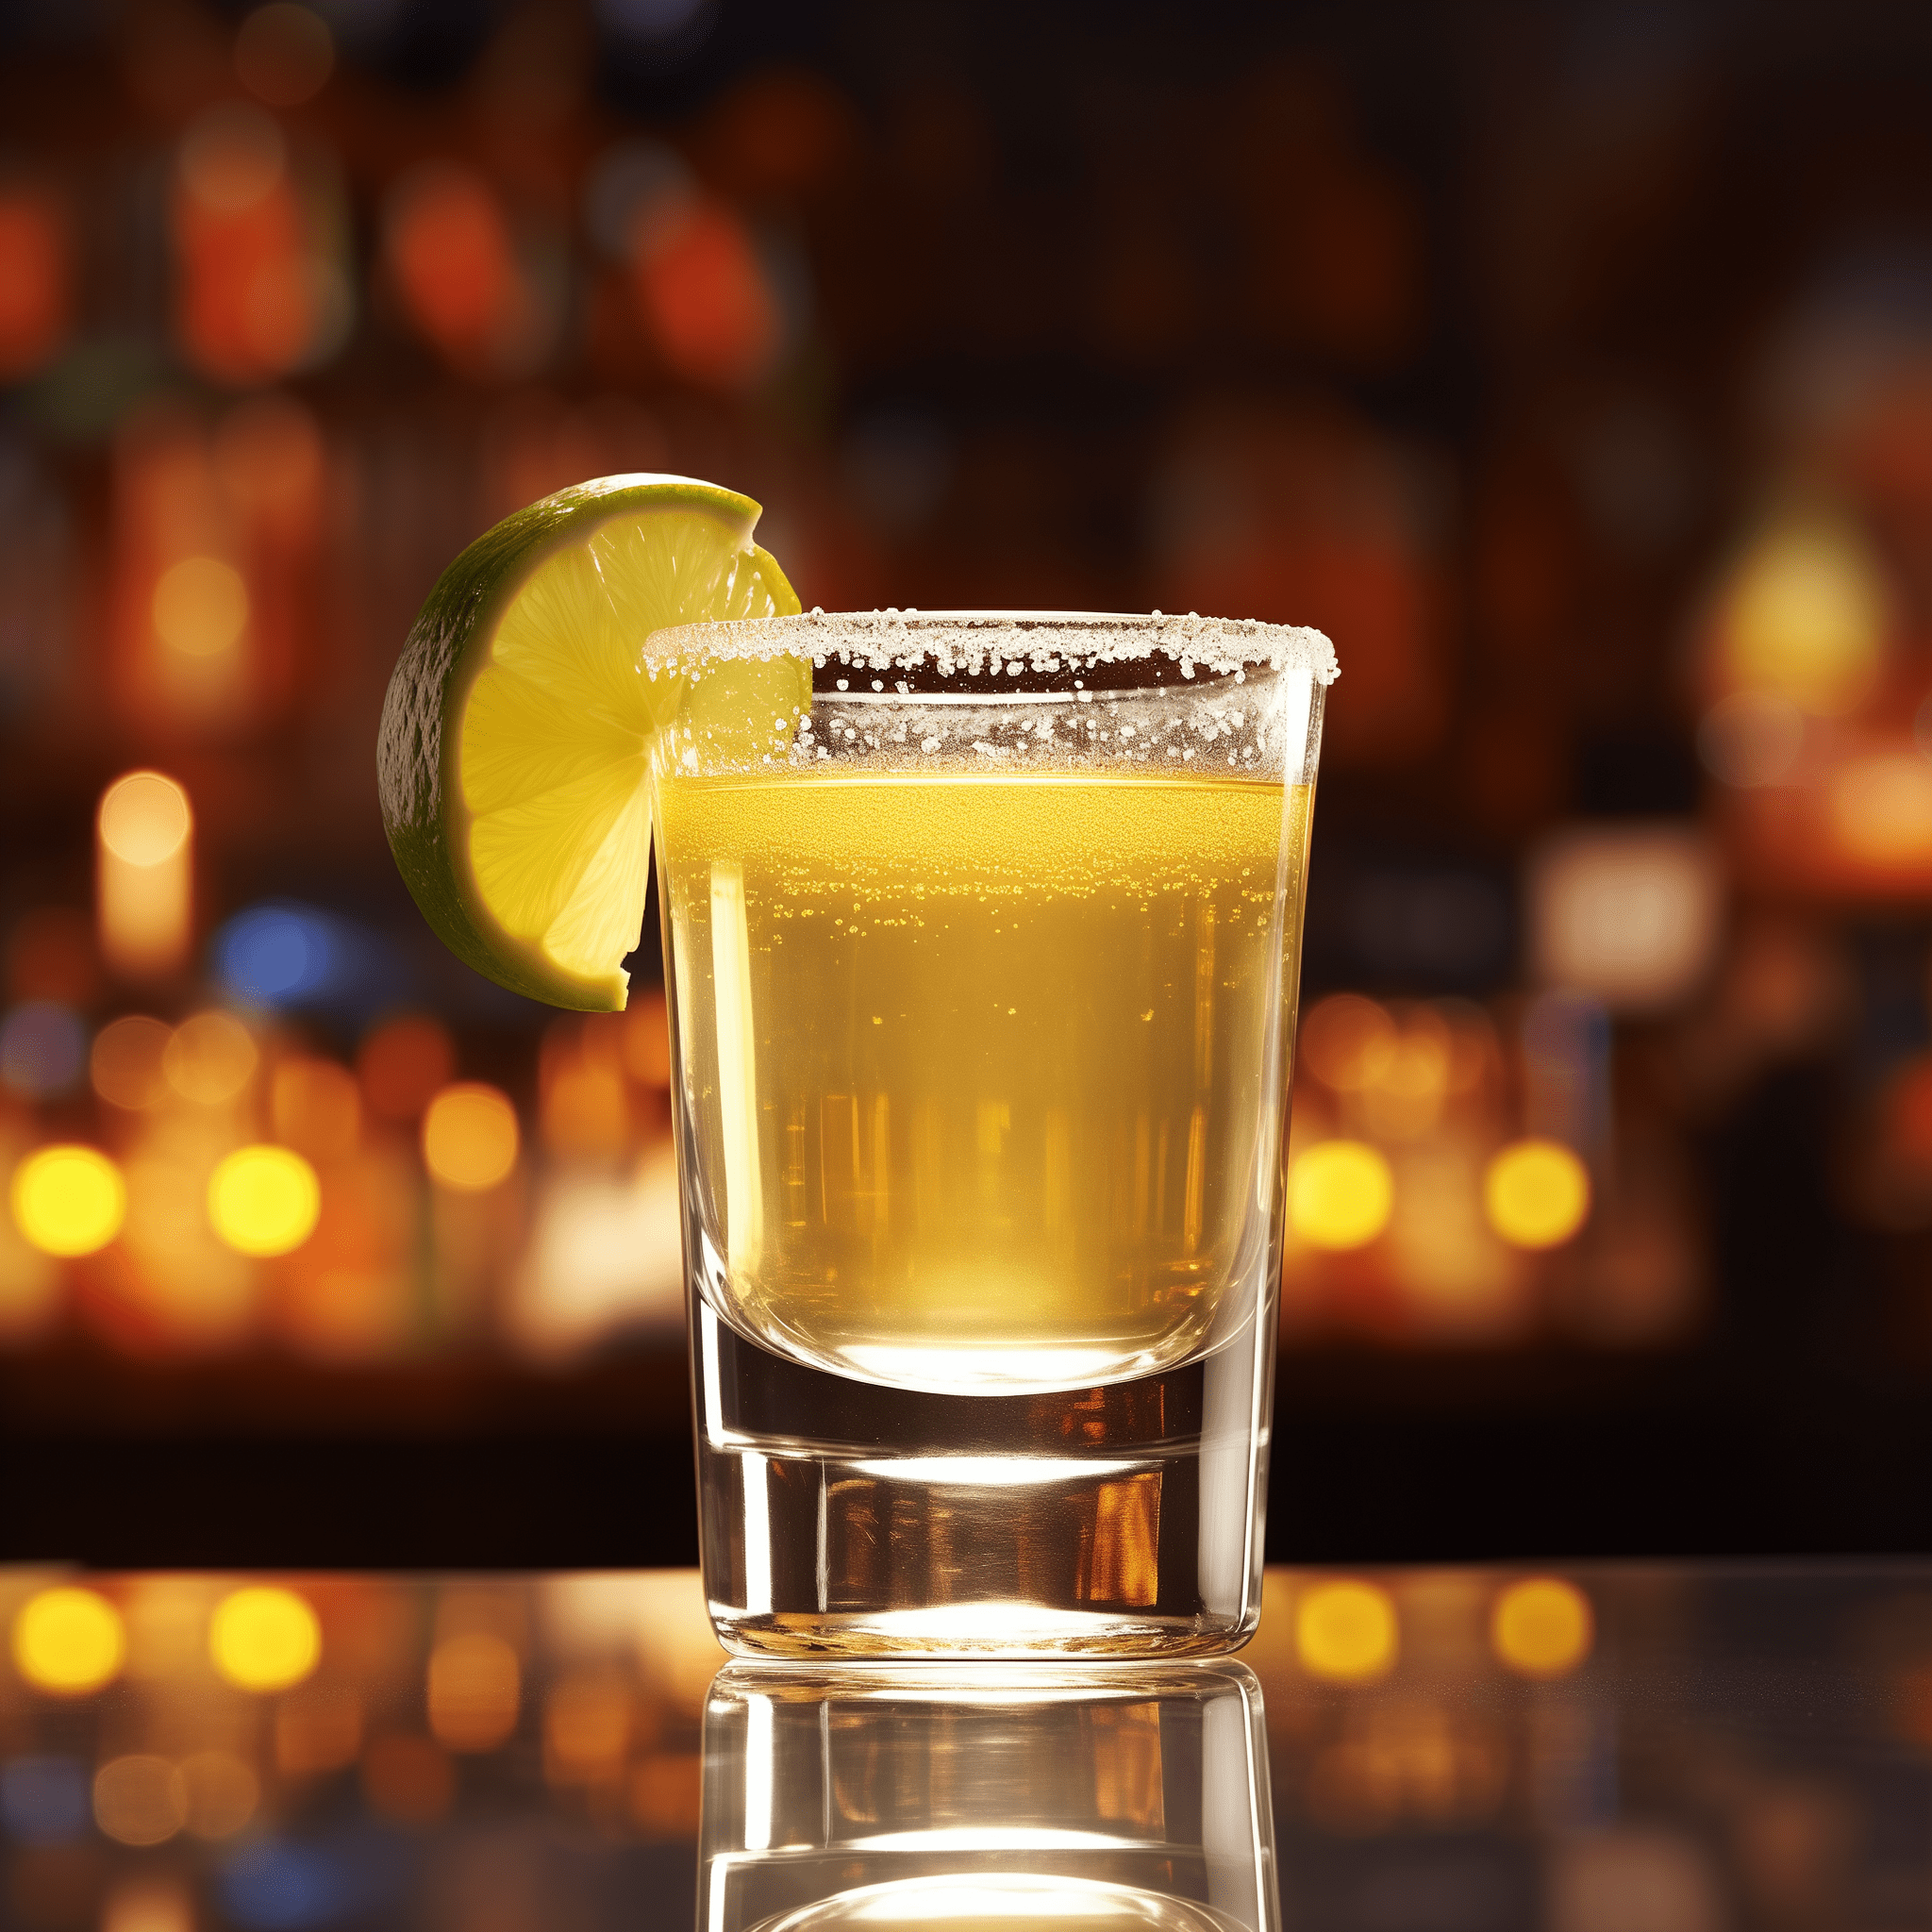 Twat Recipe - The Twat shot offers a sweet and smooth taste with a citrusy undertone from the lemon. The sugar rim adds a delightful crunch and sweetness that balances the zesty lemon, making it a refreshing choice.